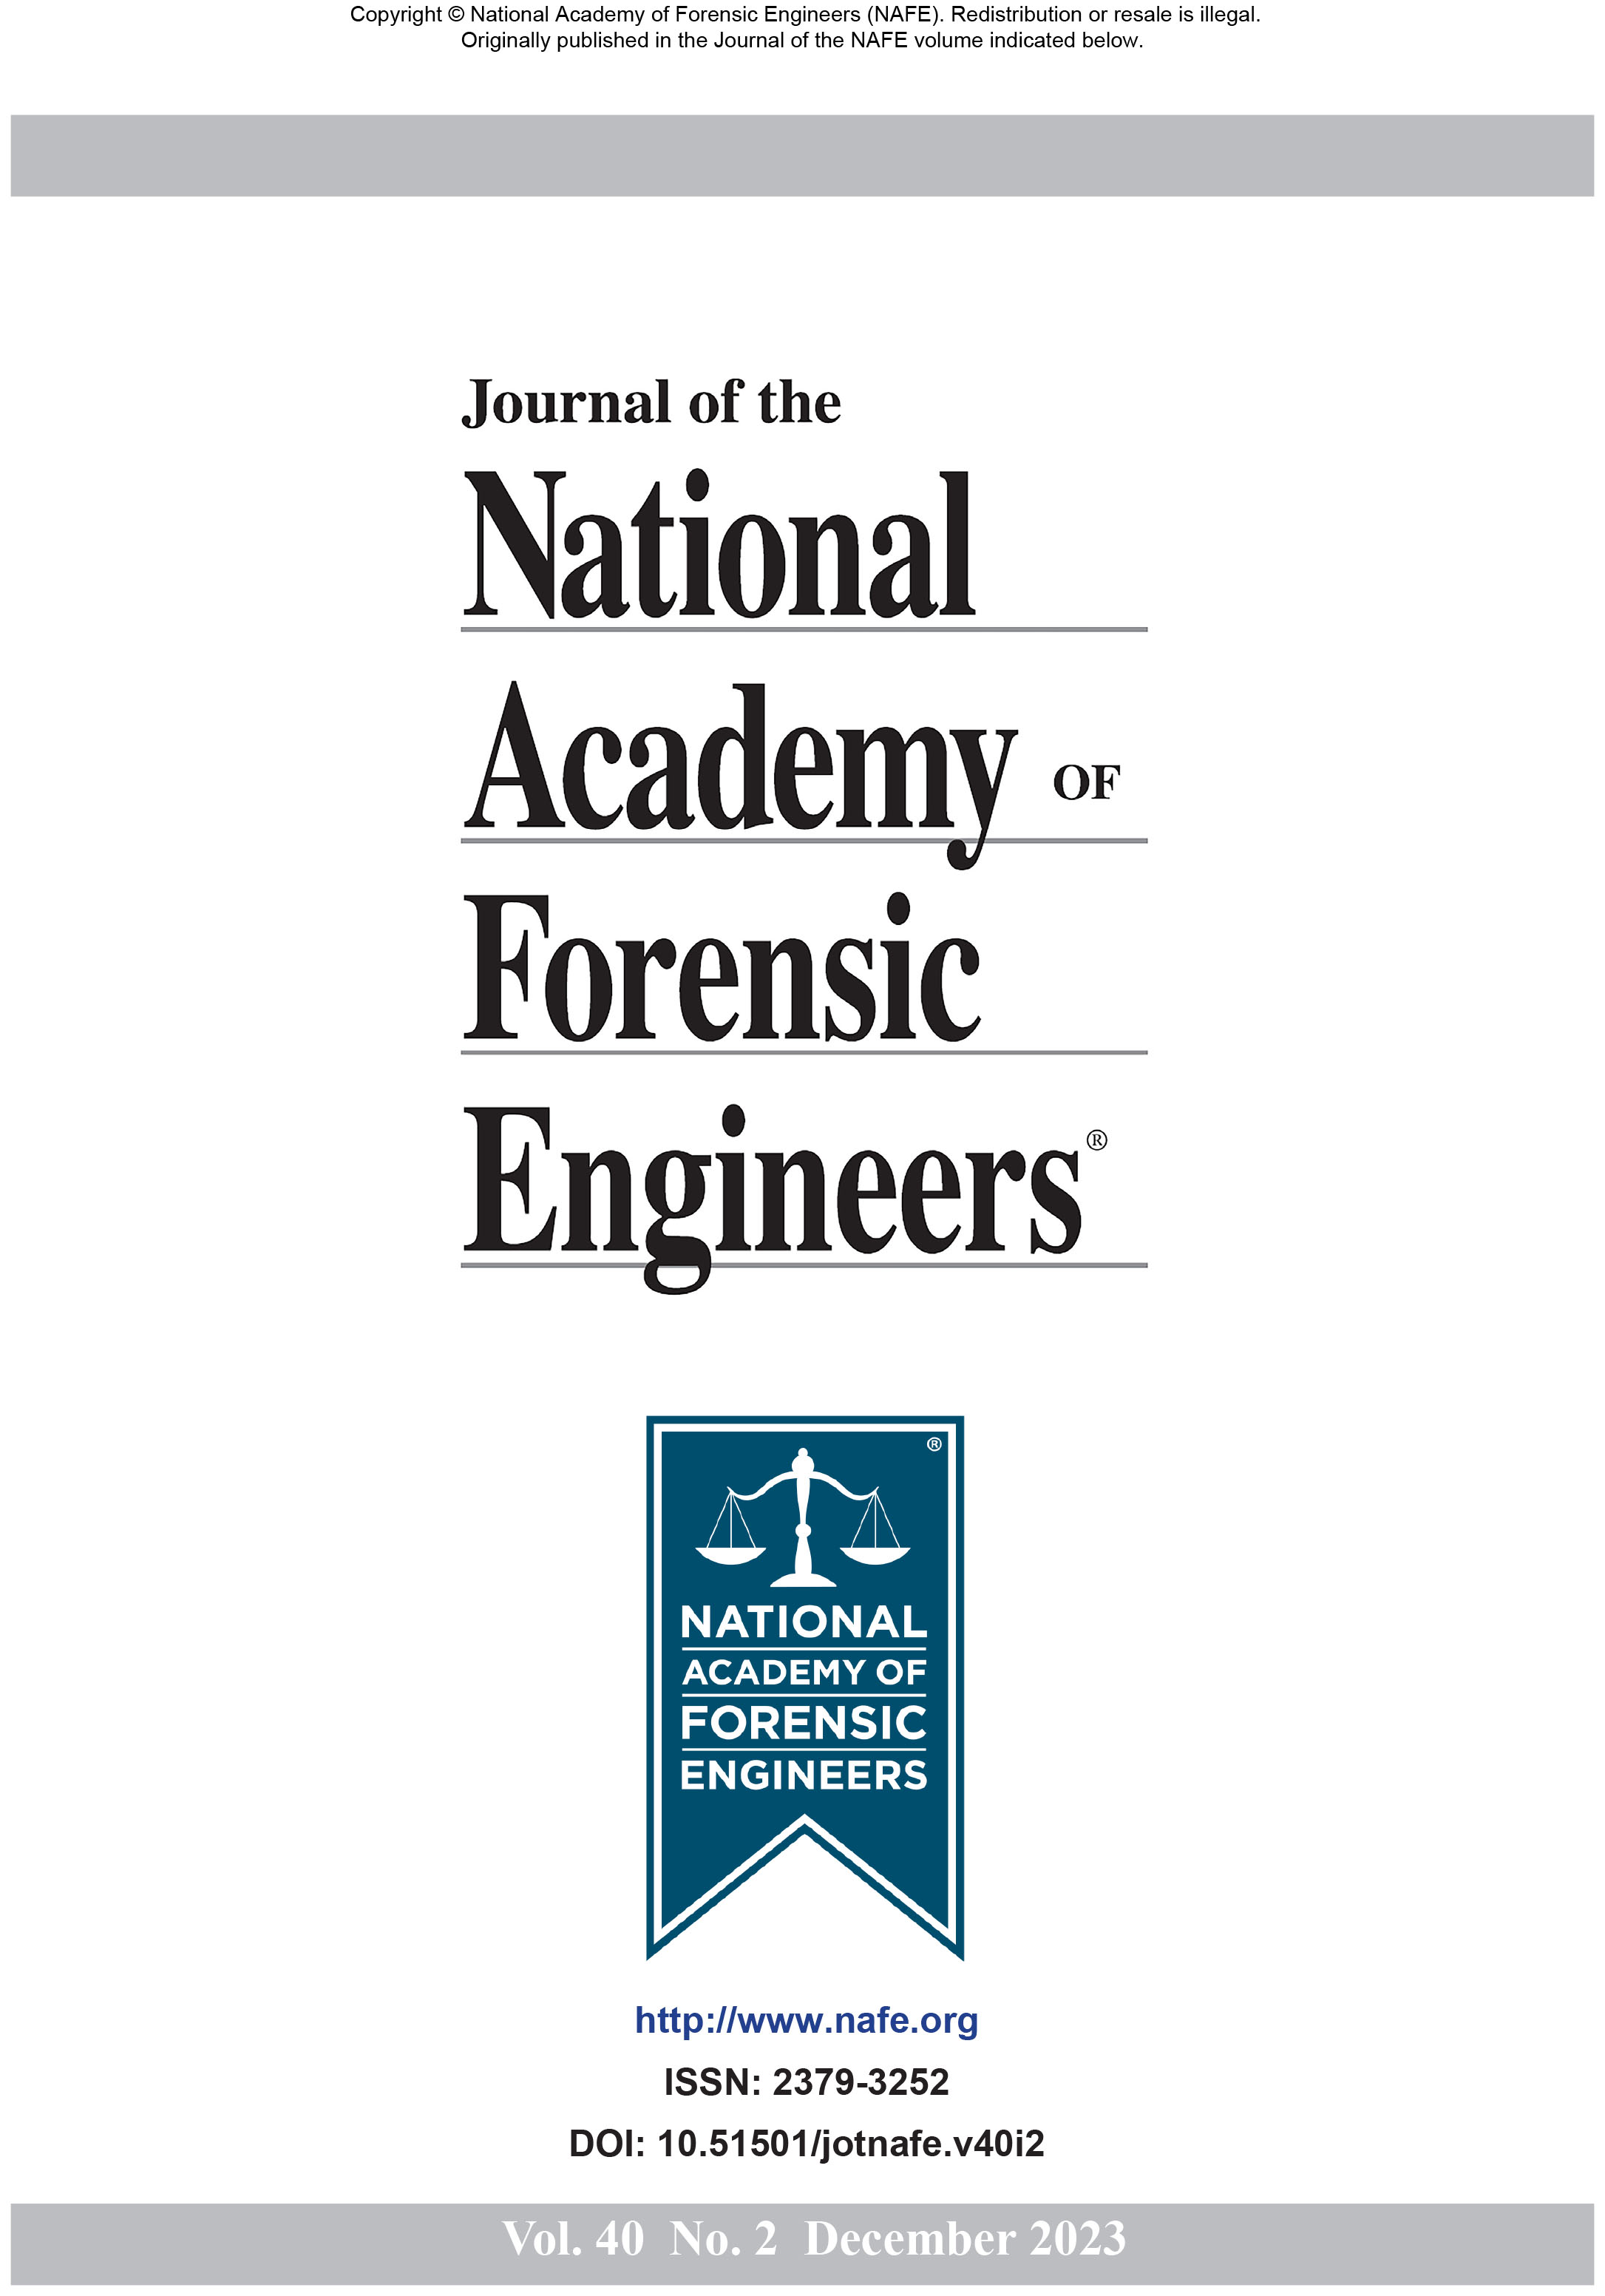 					View Vol. 40 No. 2 (2023): Journal of the National Academy of Forensic Engineers
				